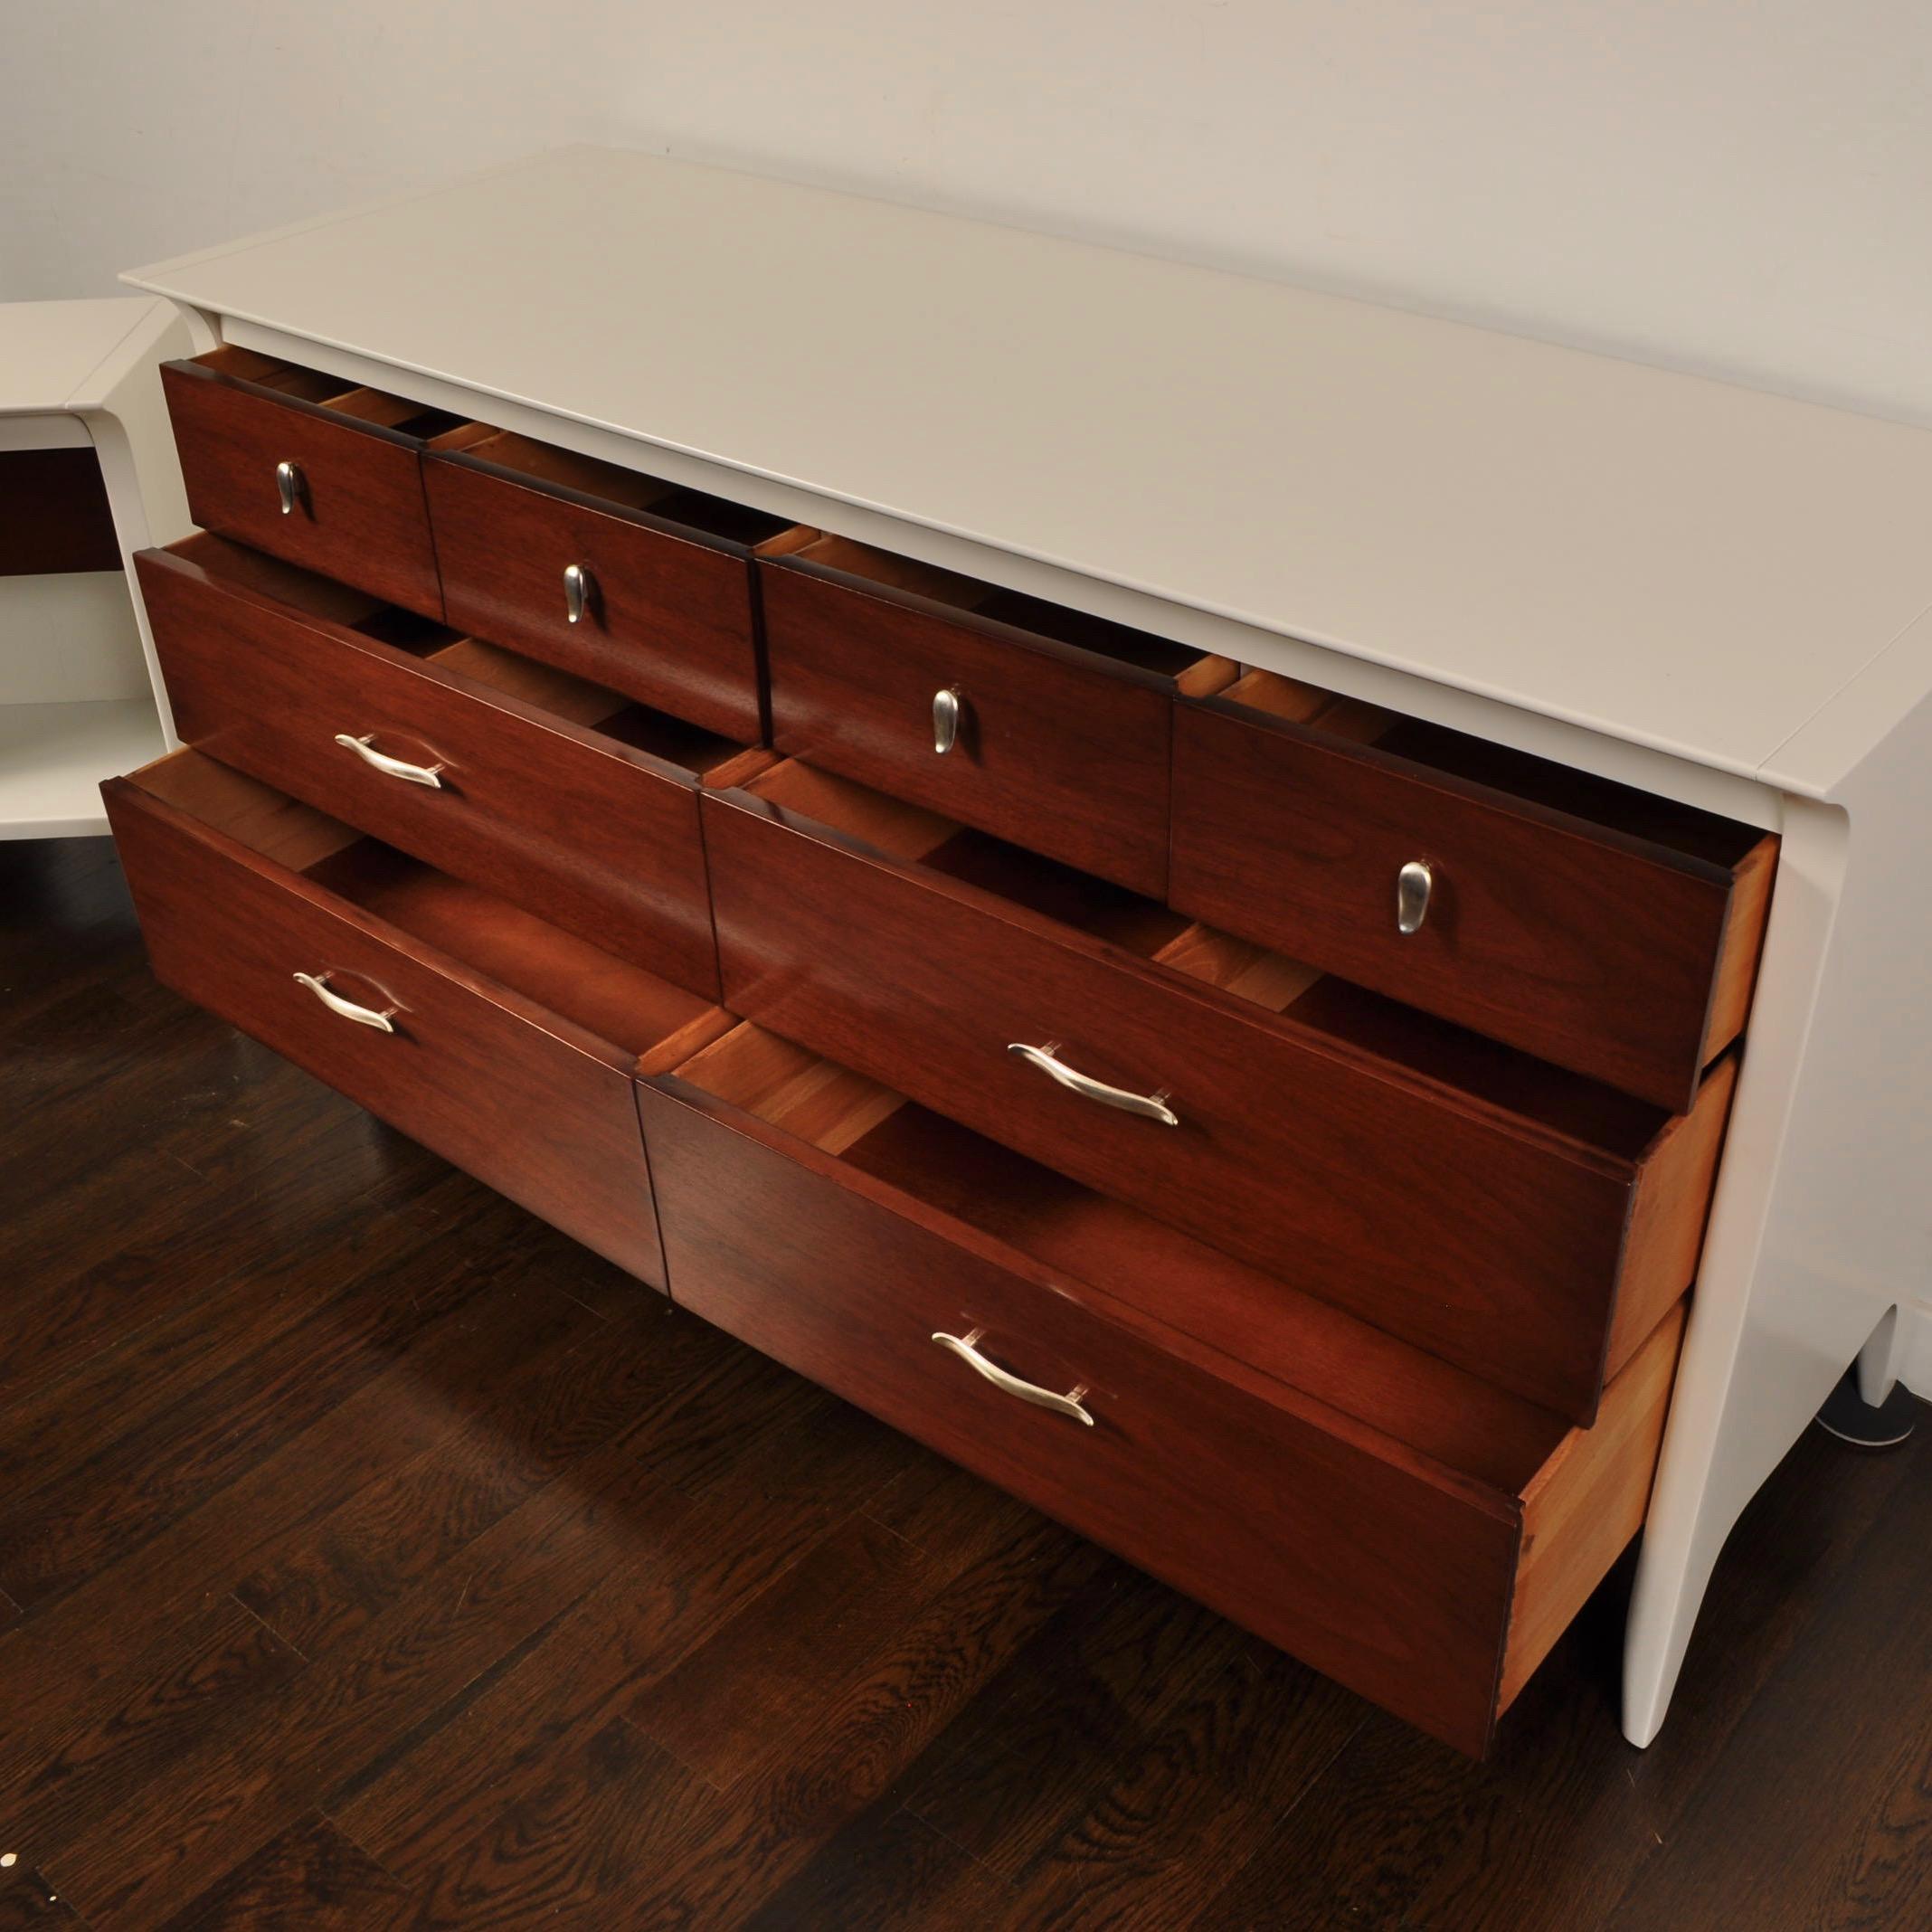 Lacquered Low Dresser and Nightstand by Drexel In Good Condition For Sale In New London, CT